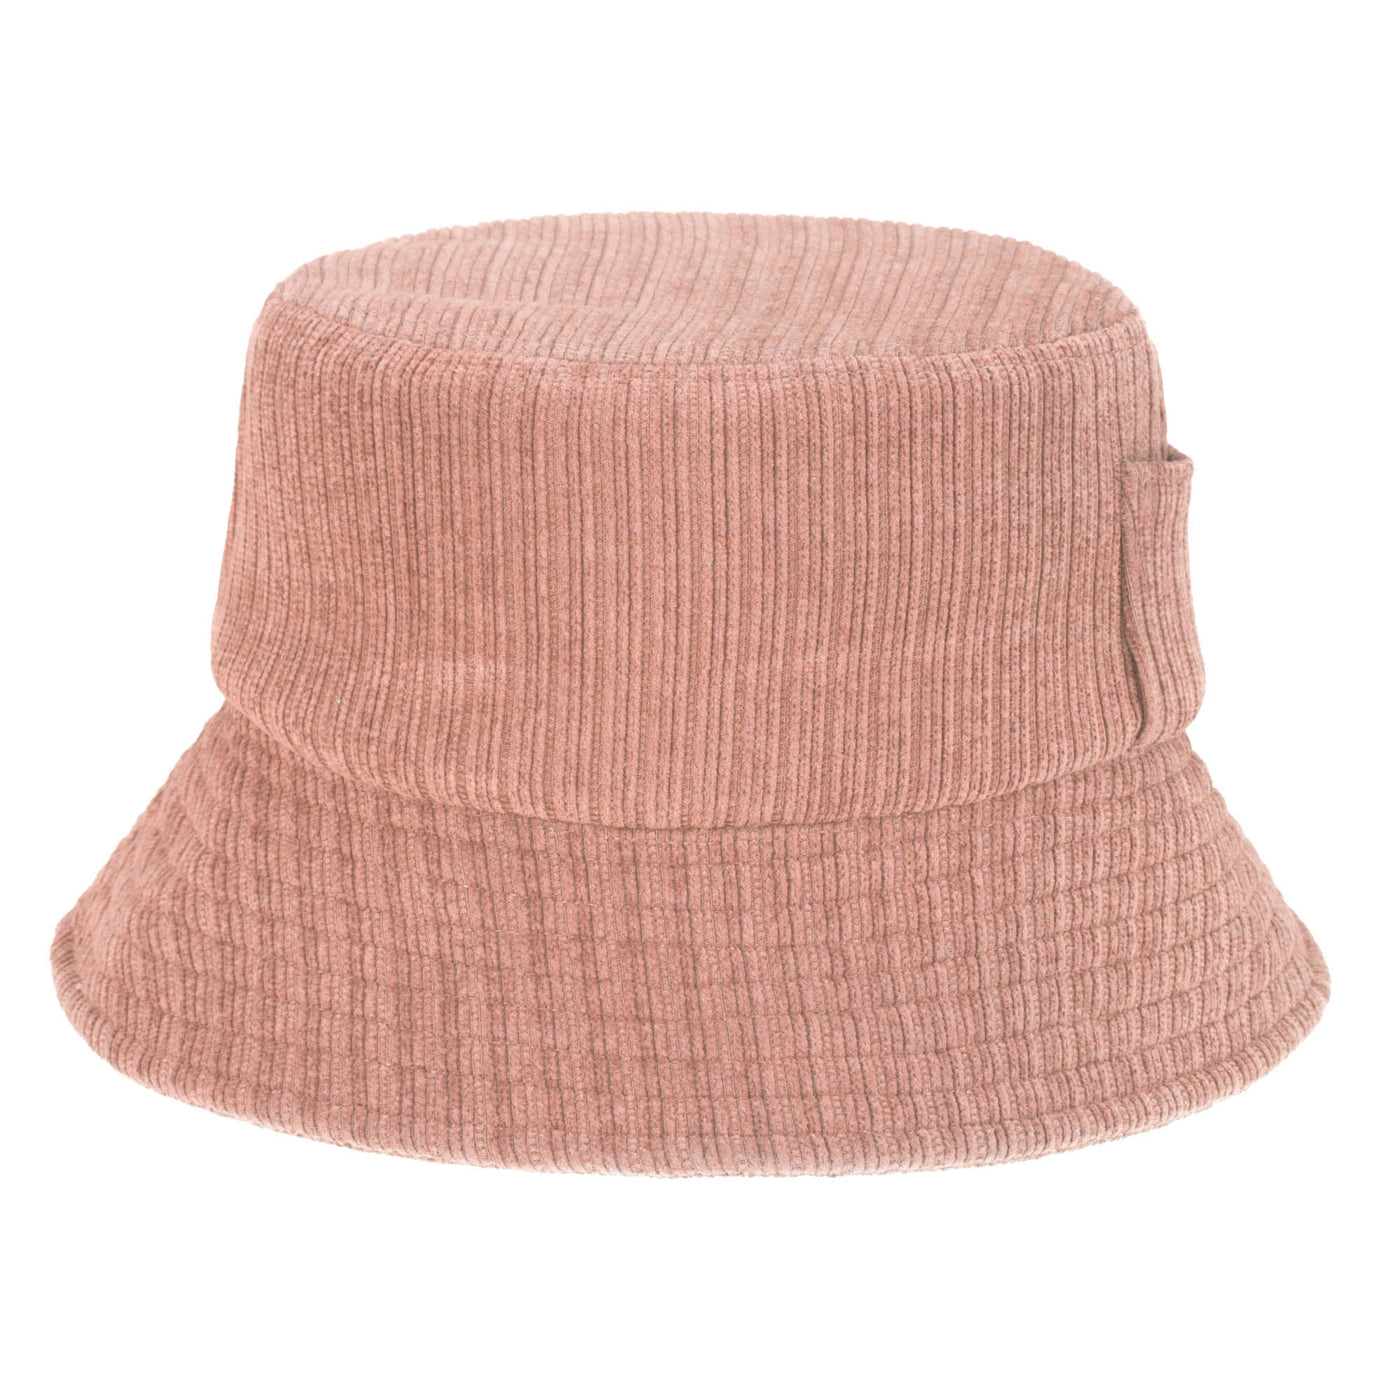 San Hat Cozy Chic and Hat Company Bucket – Diego Women\'s